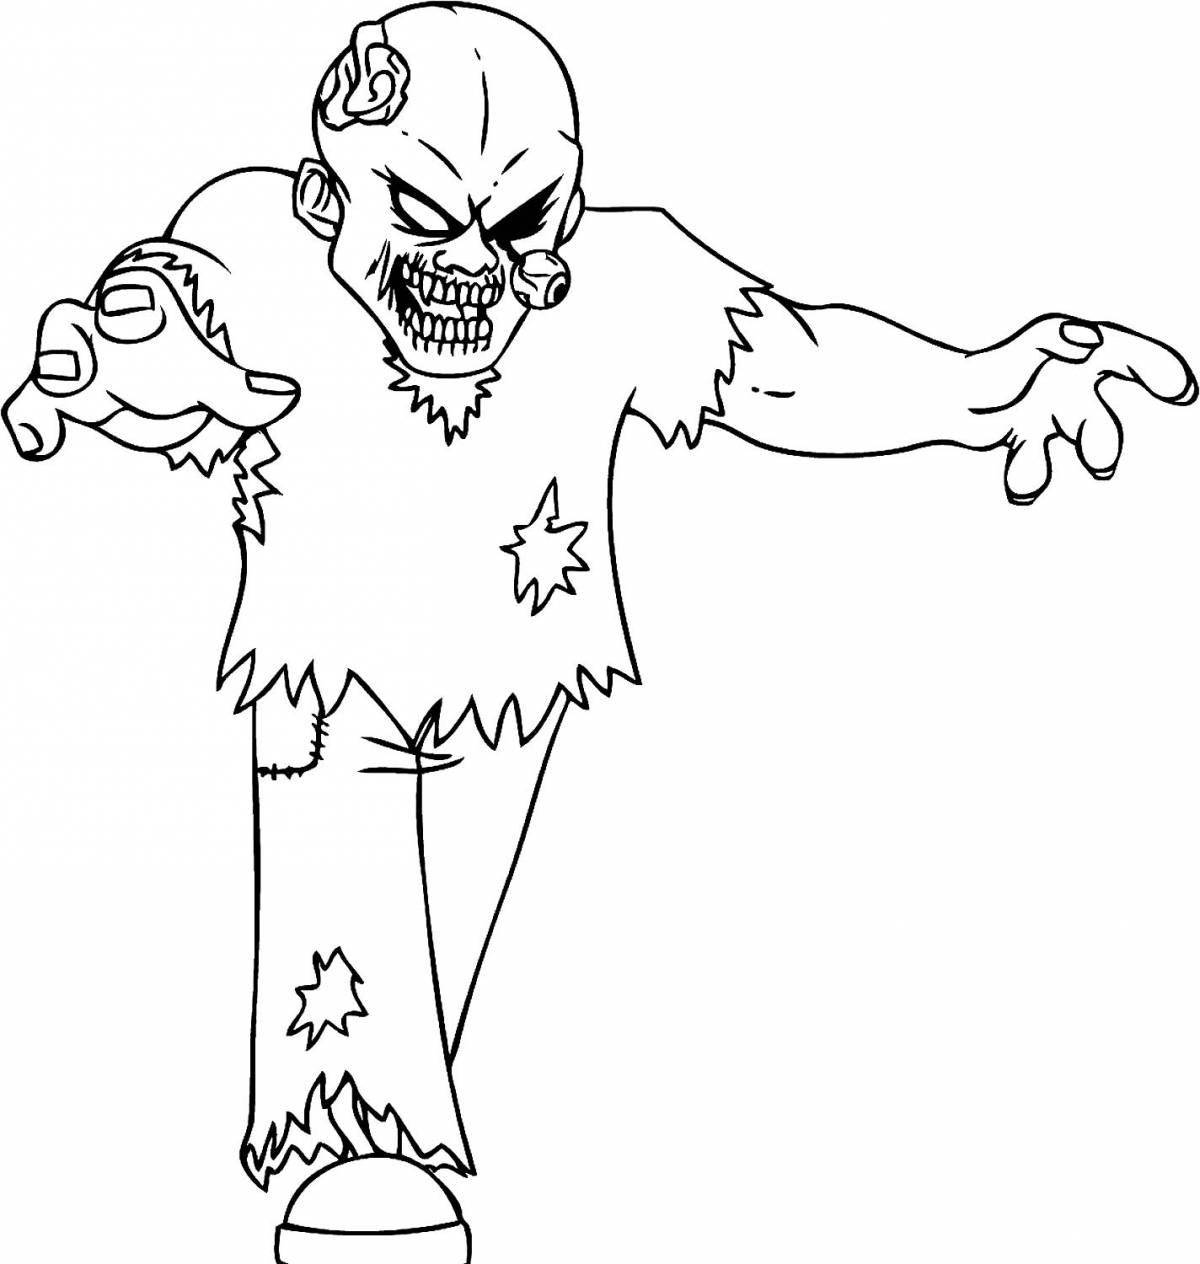 Zombie mutant nasty coloring page